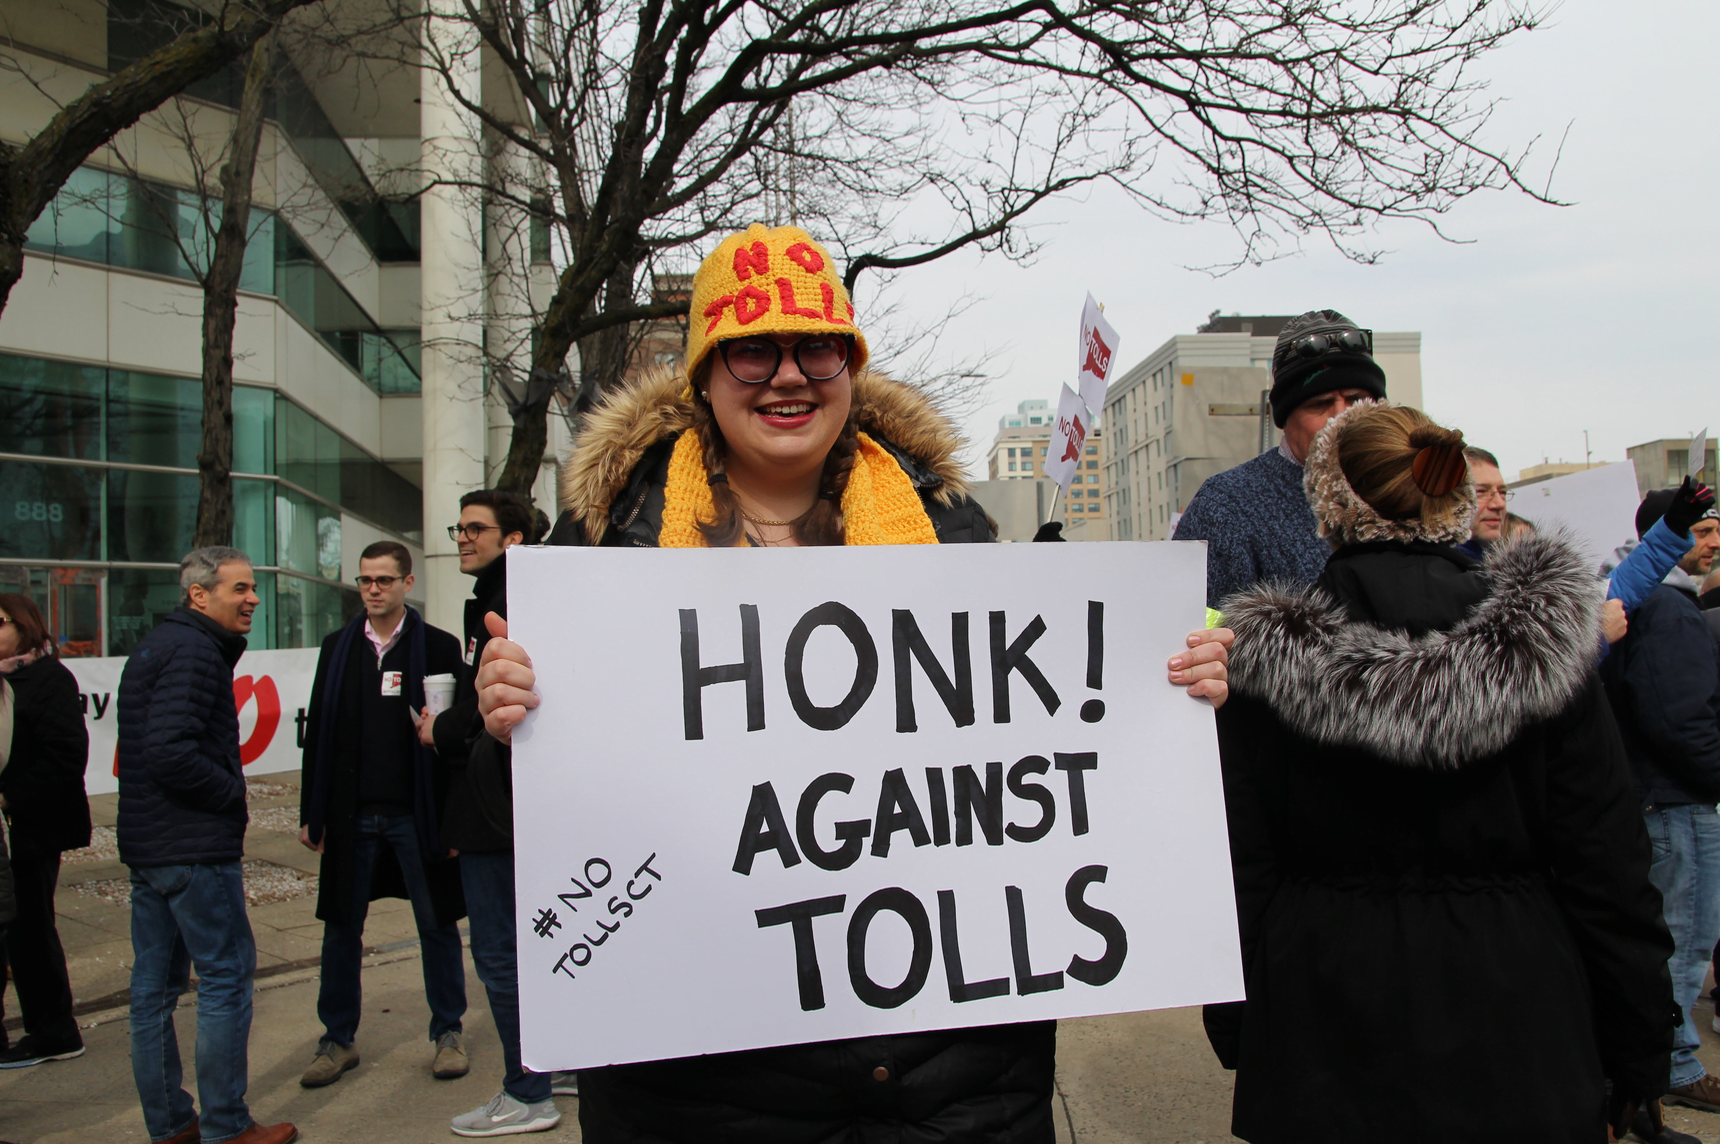 Hillary Gunn with a home made hat and protest sign at the anti-toll rally outside Stamford Government Center on Saturday, Feb 23, 2019 Photo: Leslie Yager